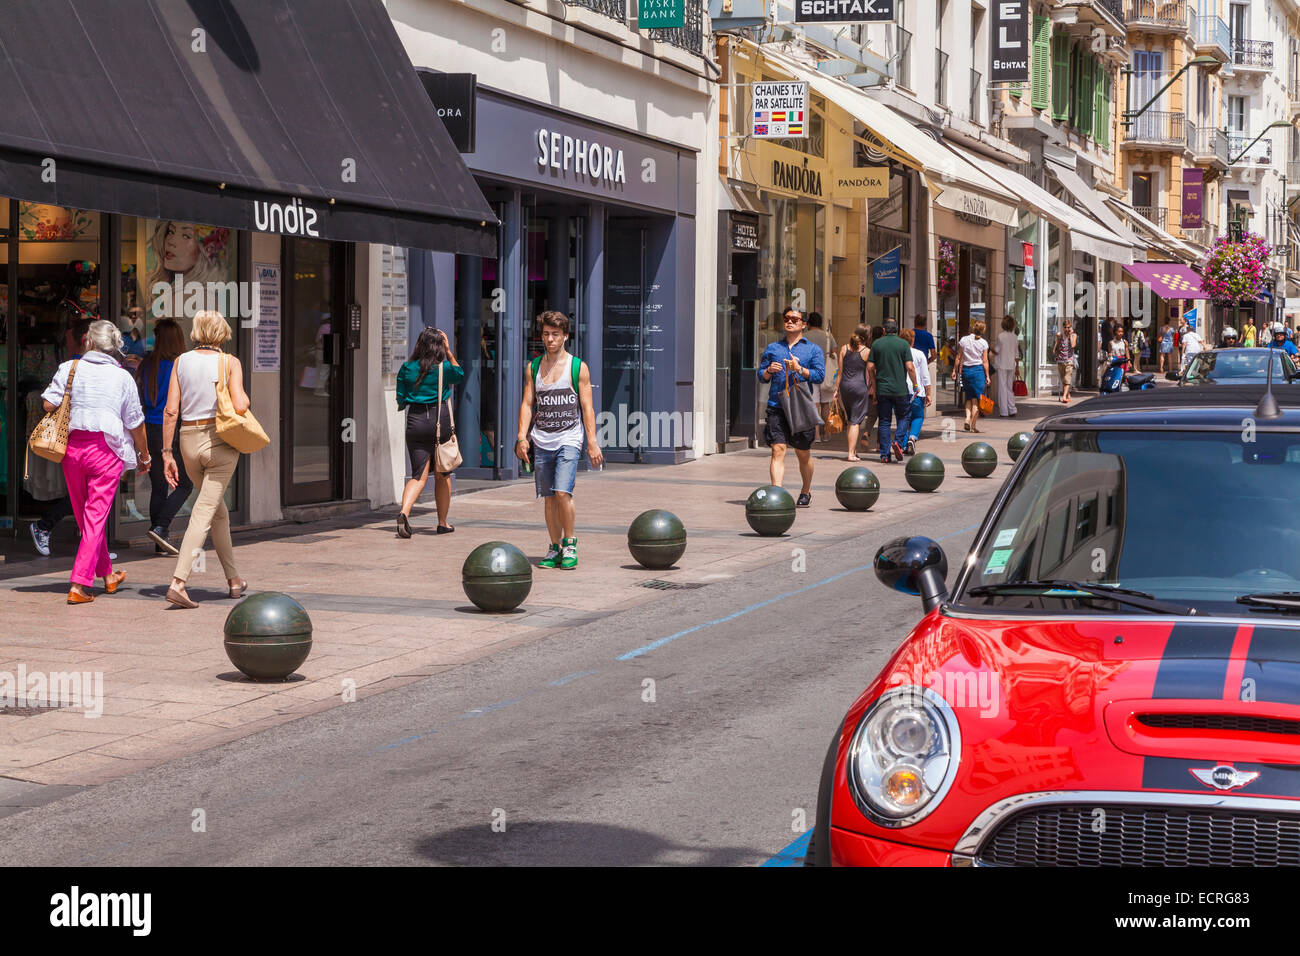 MINI COOPER, SHOPS, PEOPLE SHOPPING, RUE D'ANTIBES, SHOPPING STREET, CANNES,  COTE D'AZUR, PROVENCE, FRANCE Stock Photo - Alamy